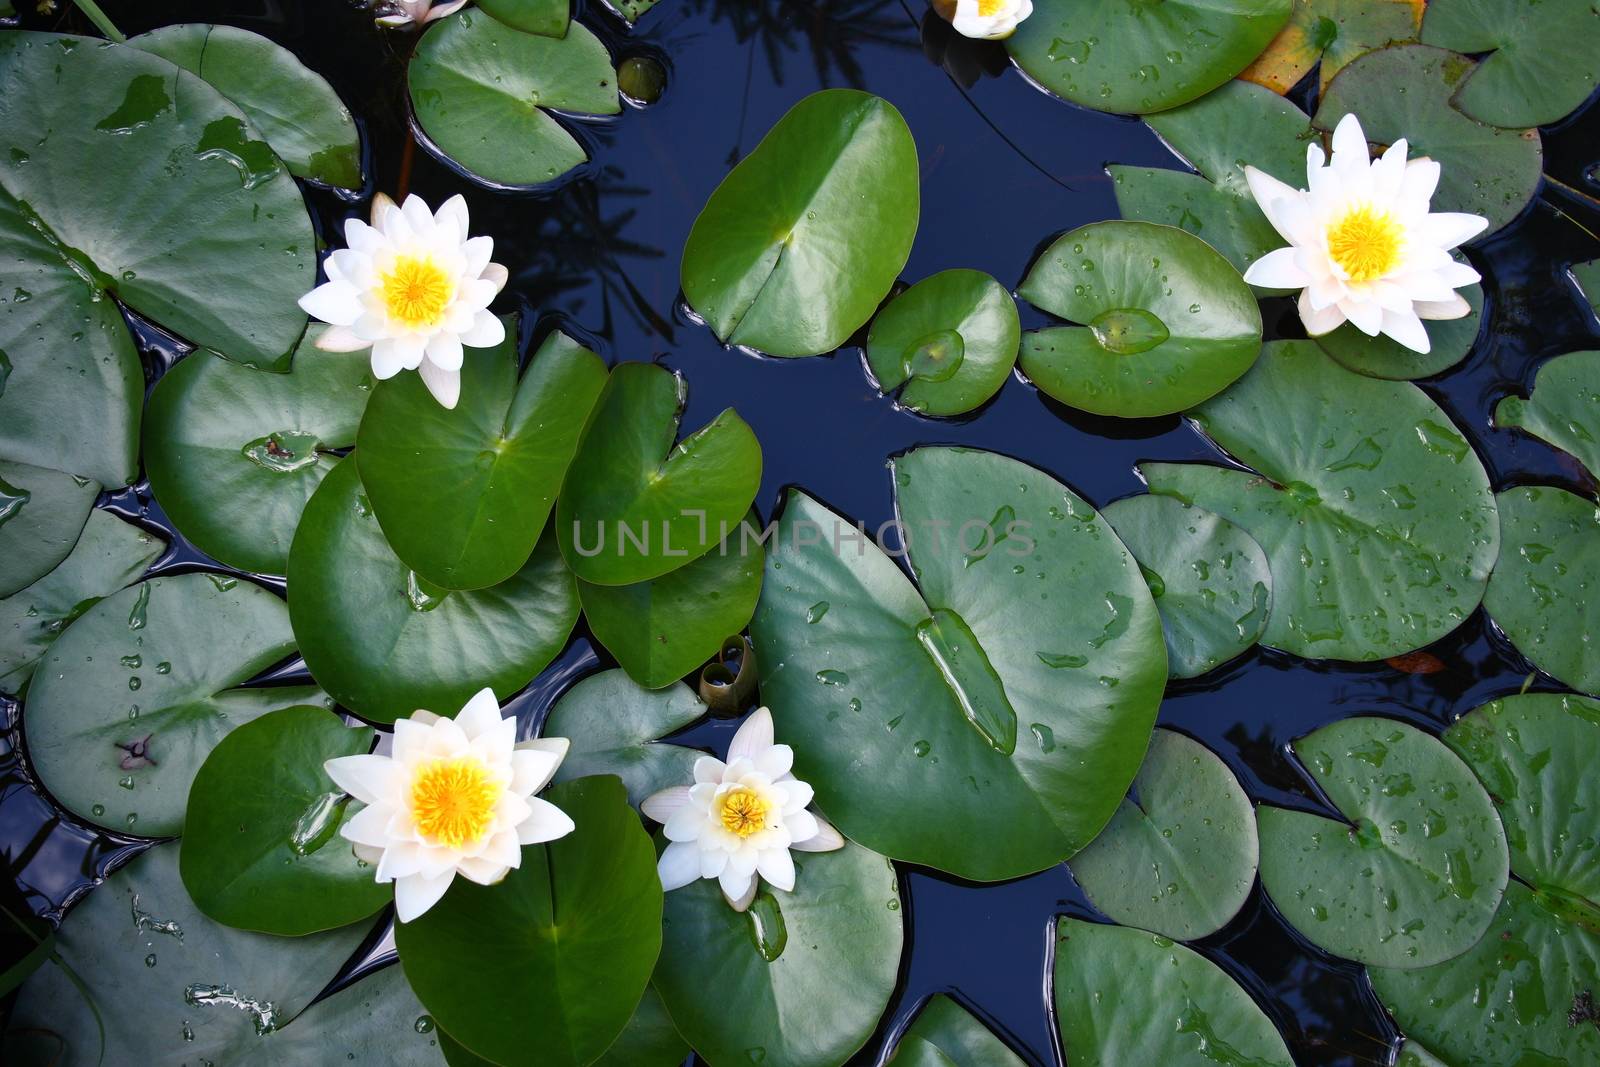 Several flowers of a white water lily (Nymphaea alba)